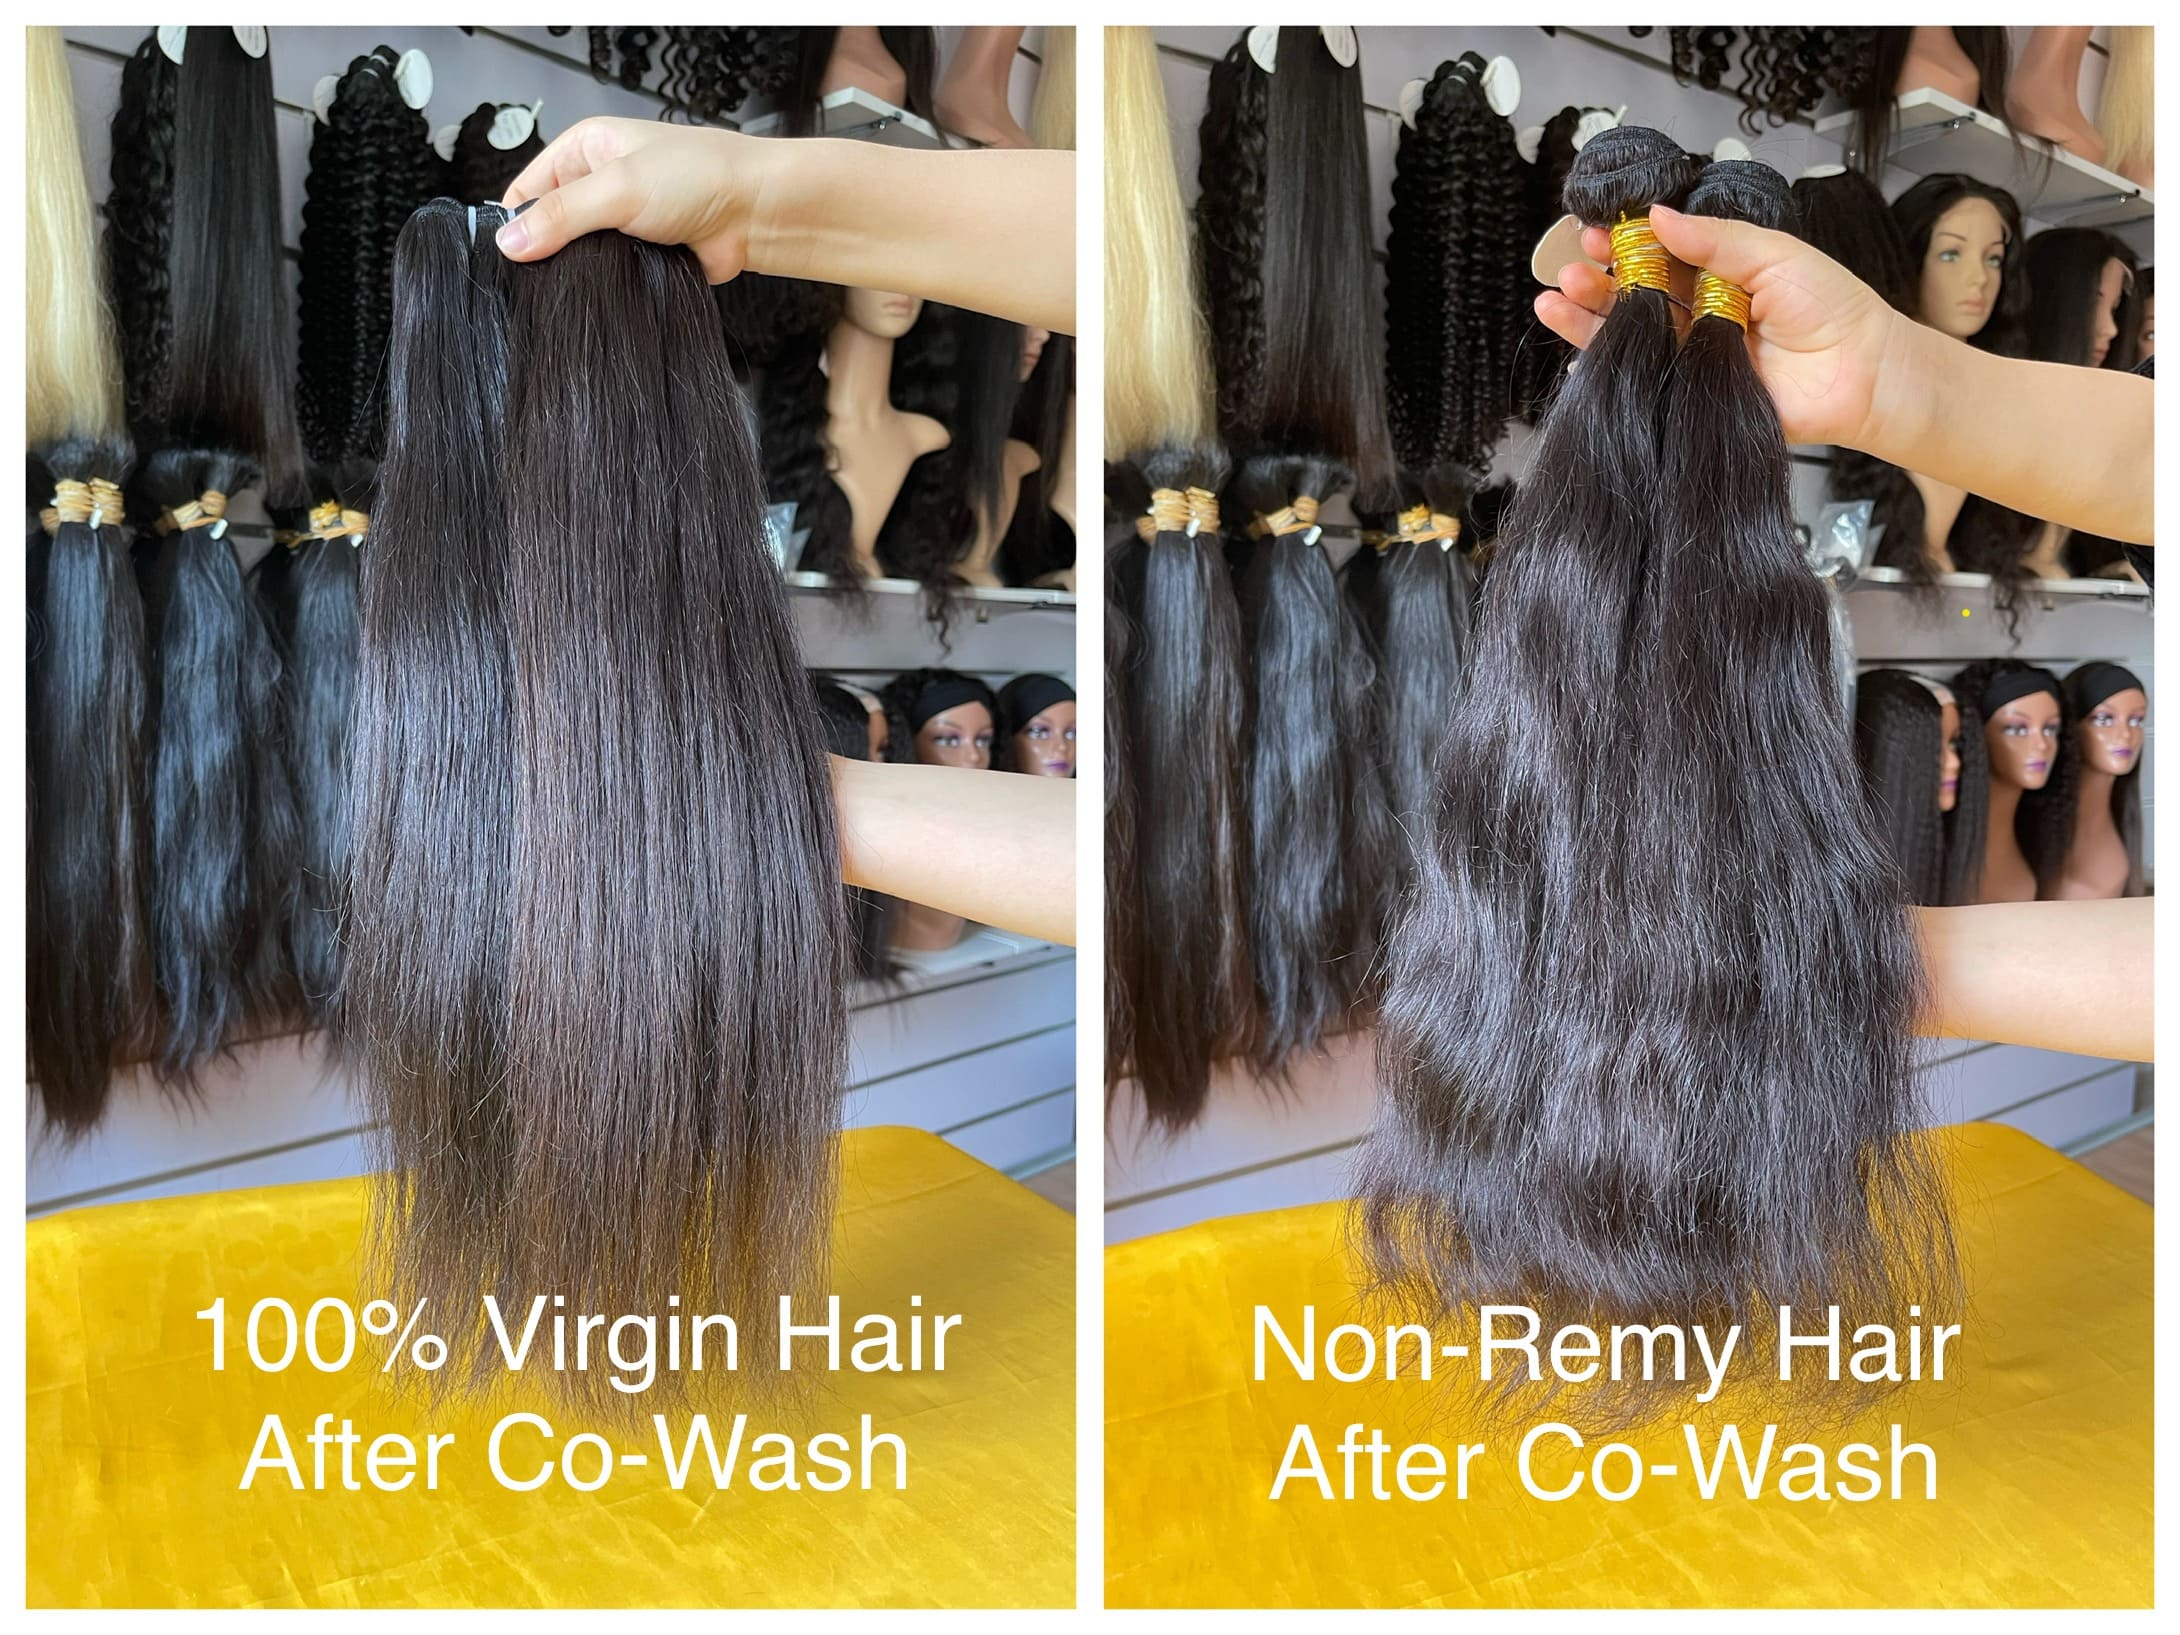 100% virgin hair after co-wash VS non-remy hair co-wash